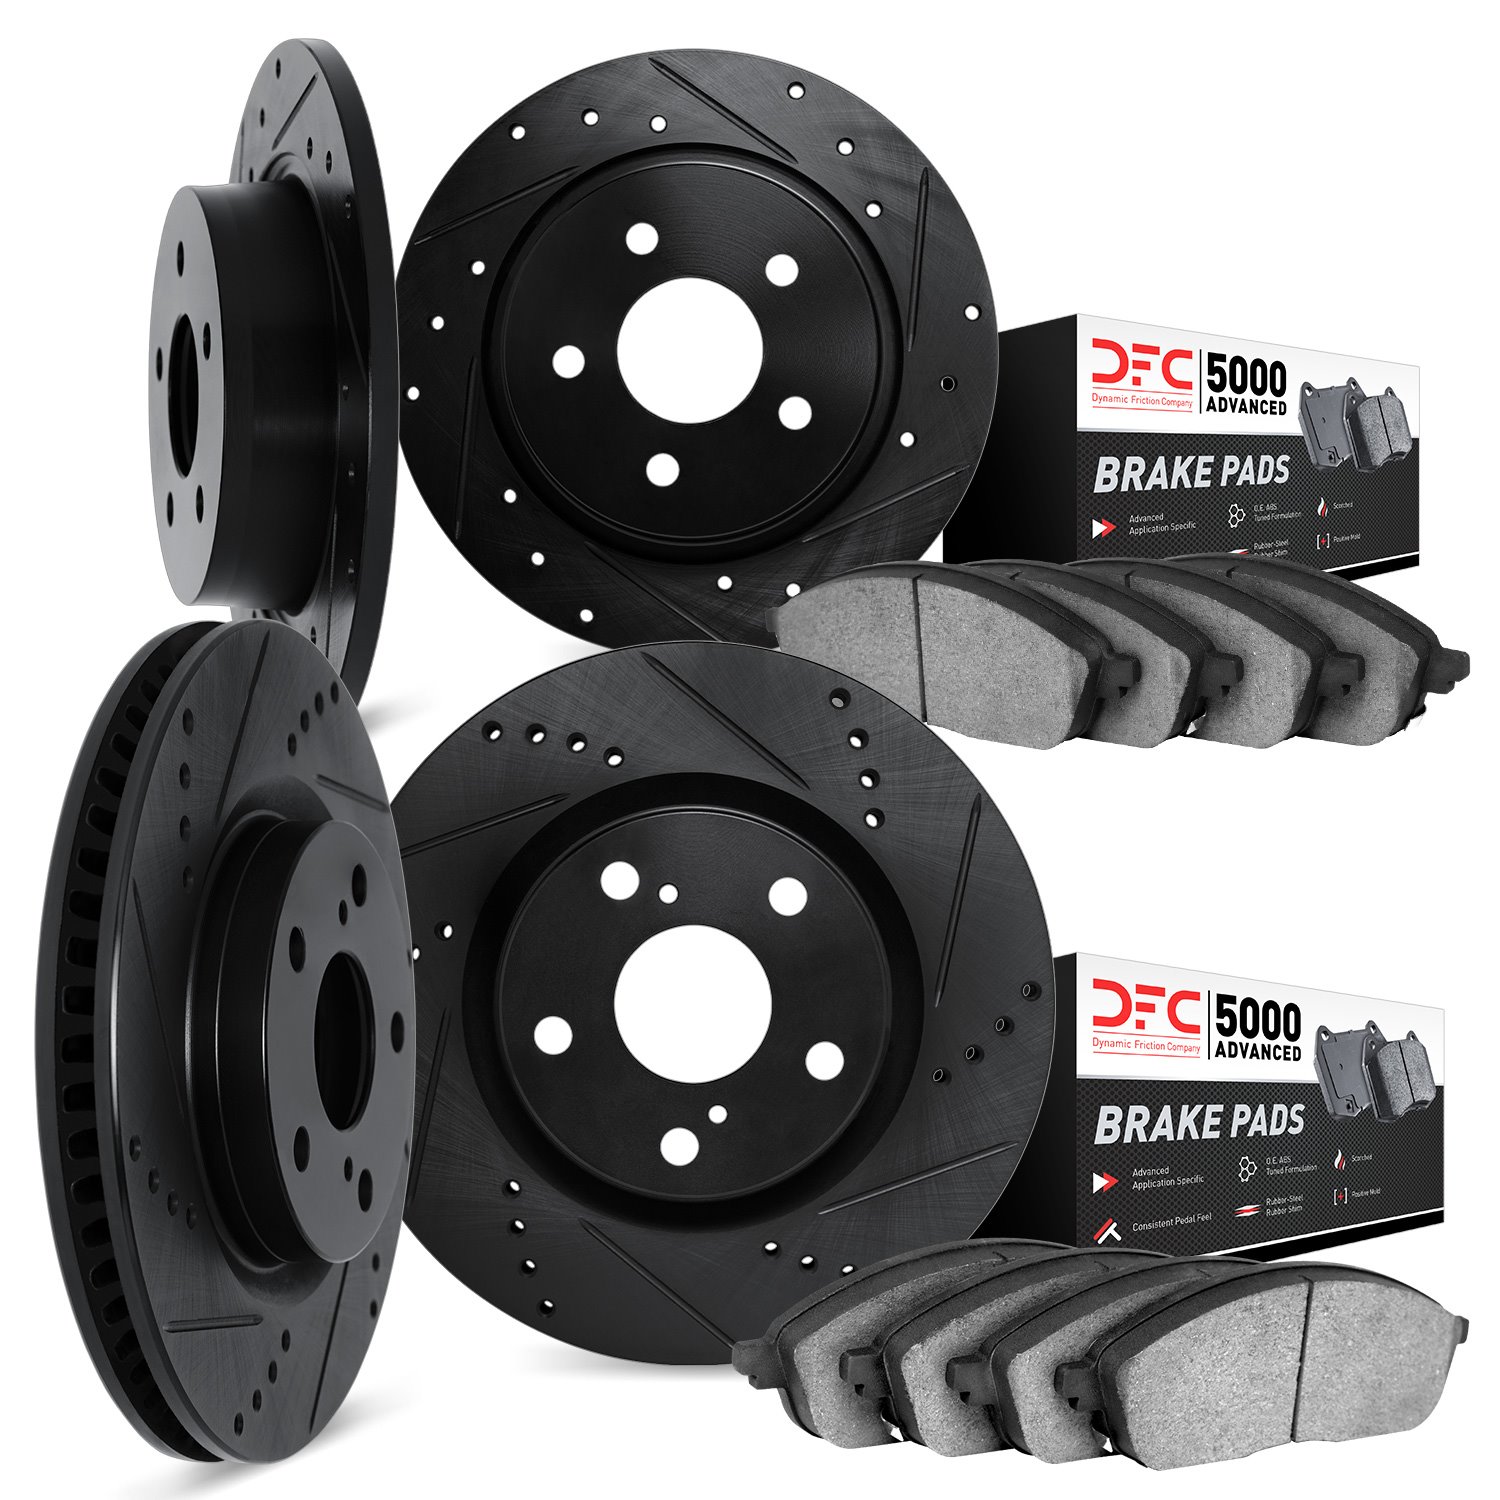 8504-68001 Drilled/Slotted Brake Rotors w/5000 Advanced Brake Pads Kit [Black], 1995-1996 Infiniti/Nissan, Position: Front and R